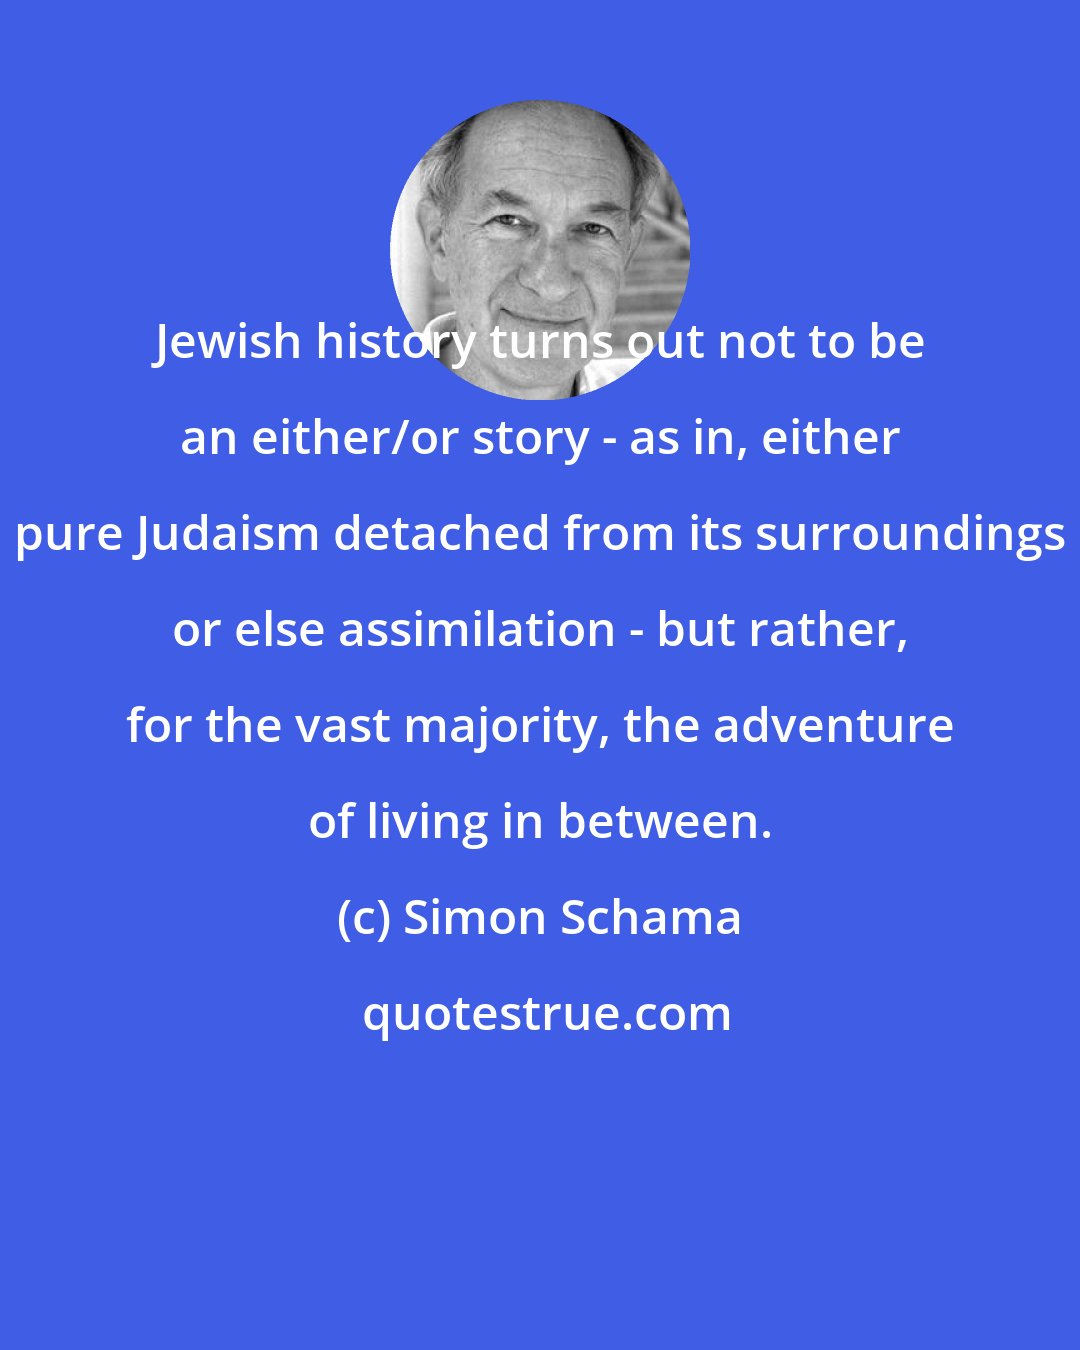 Simon Schama: Jewish history turns out not to be an either/or story - as in, either pure Judaism detached from its surroundings or else assimilation - but rather, for the vast majority, the adventure of living in between.